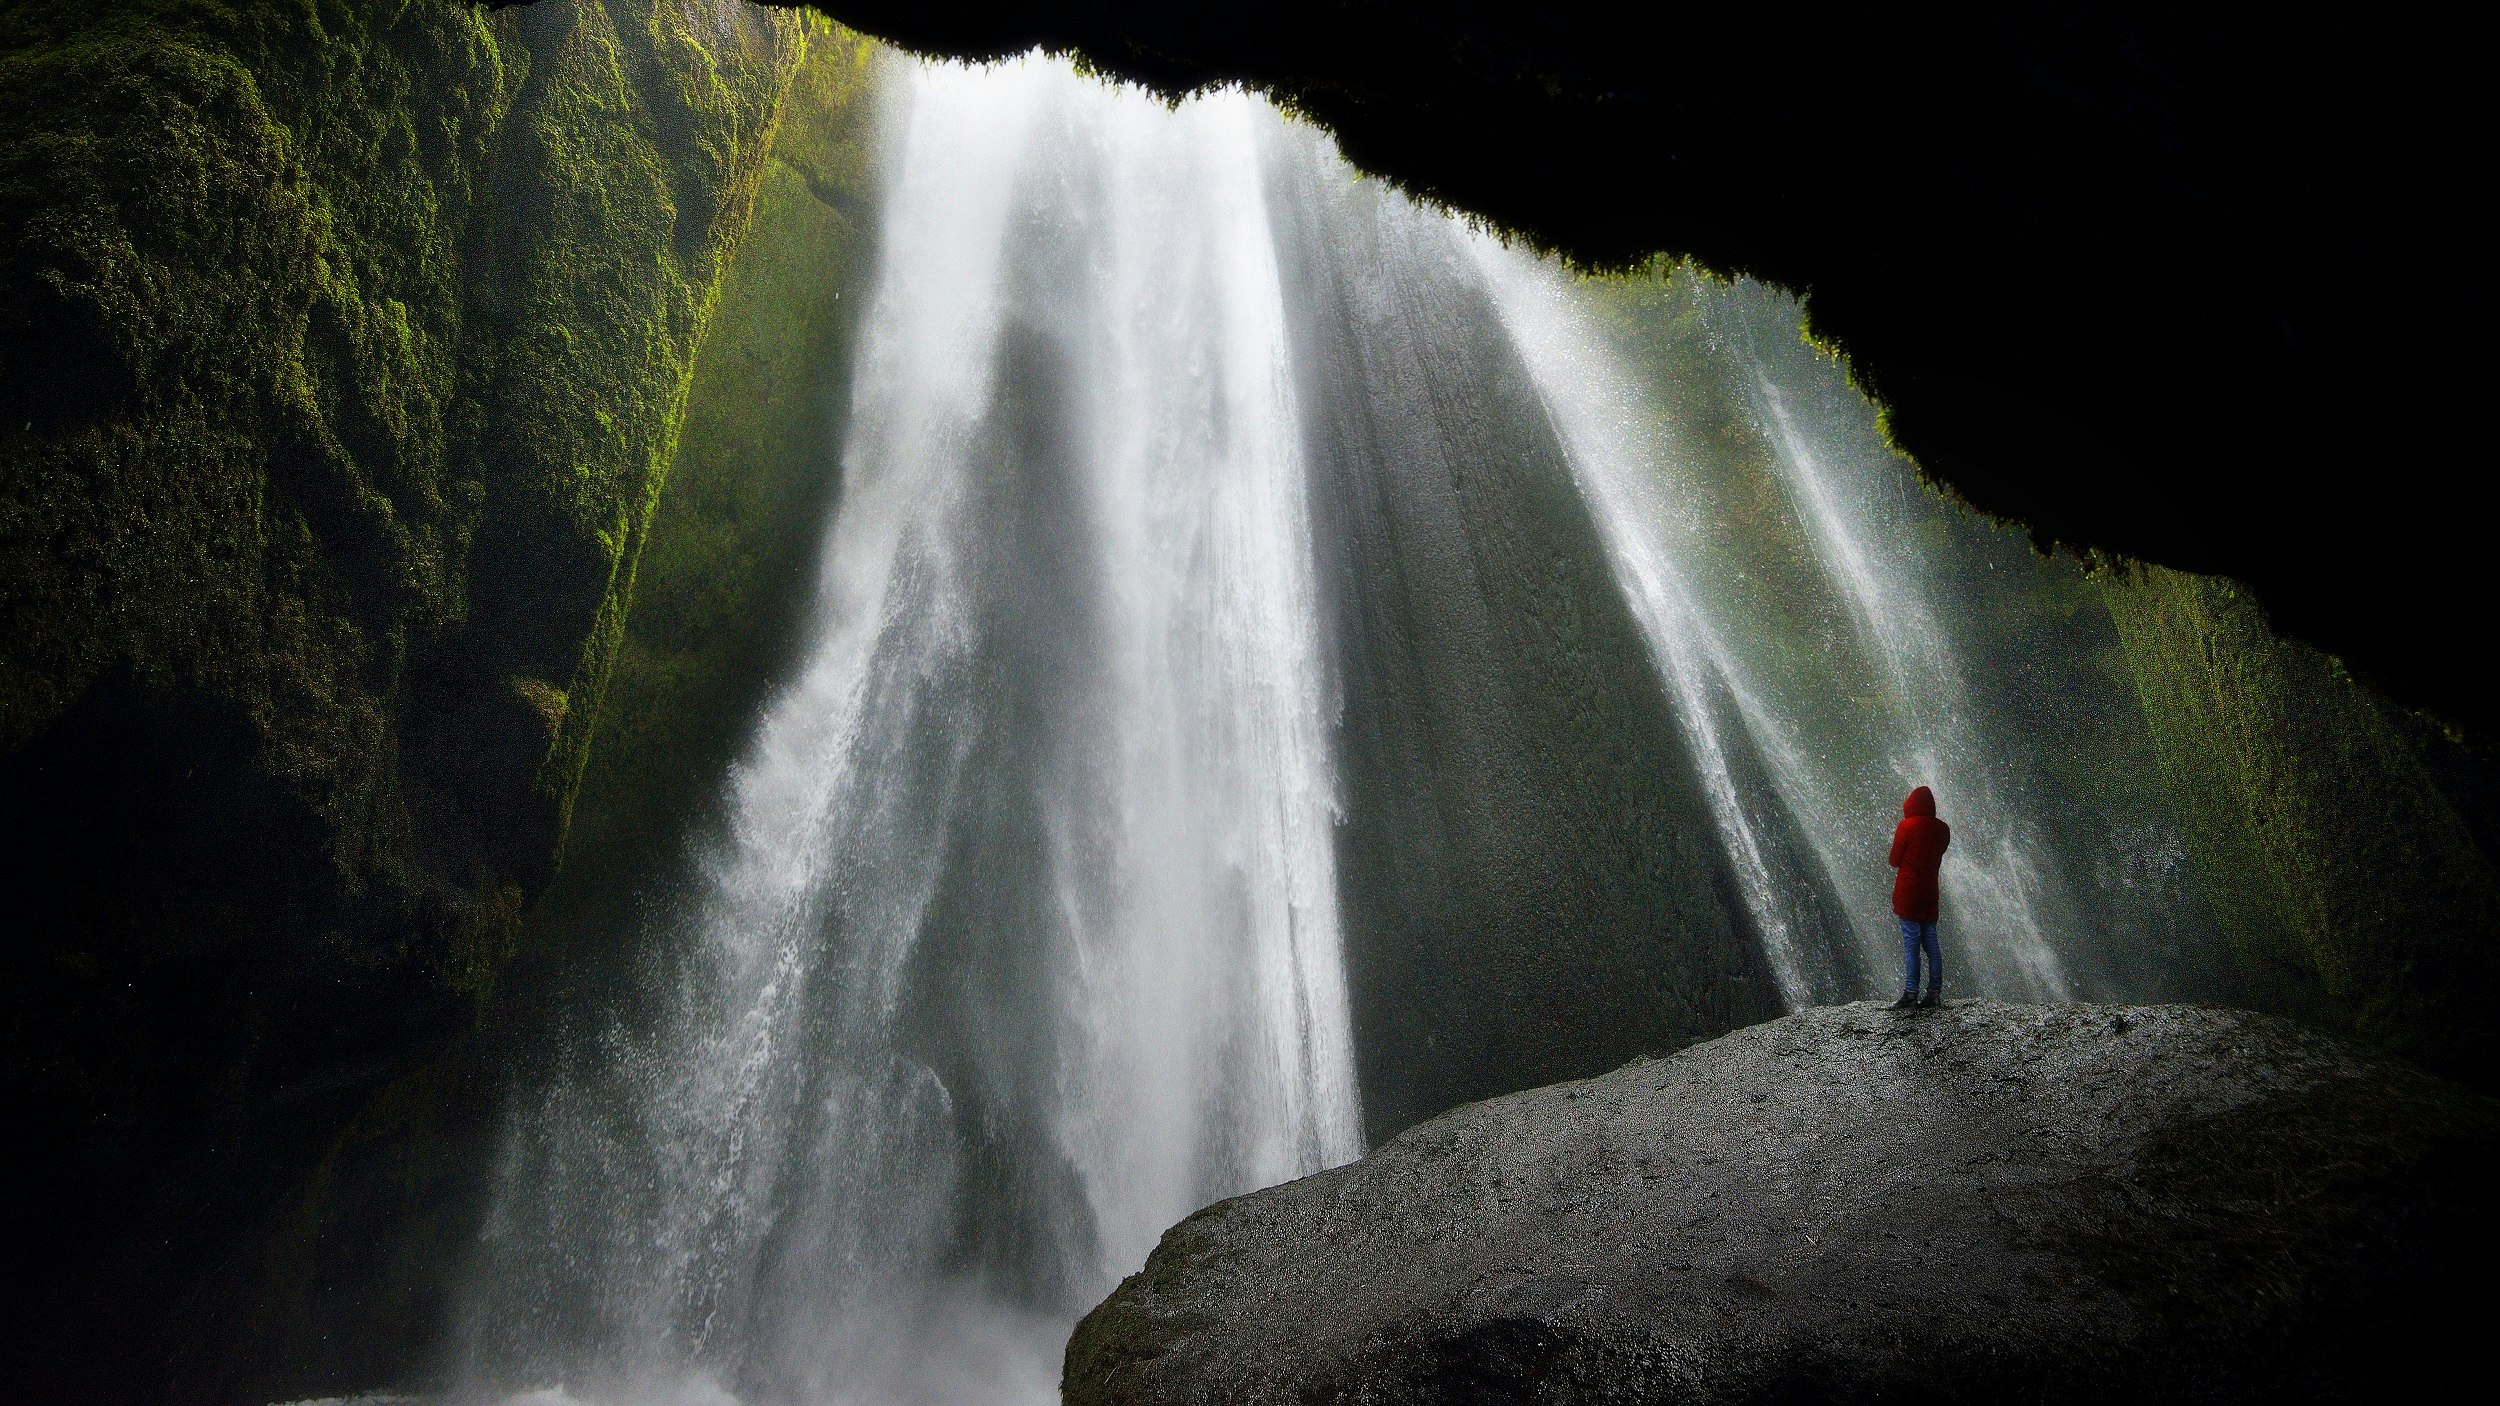 A lone person in a red jacket stands on a massive rock and stares up to a thundering waterfall crashing down in front of them; the walls of the cave are covered in vegetation.